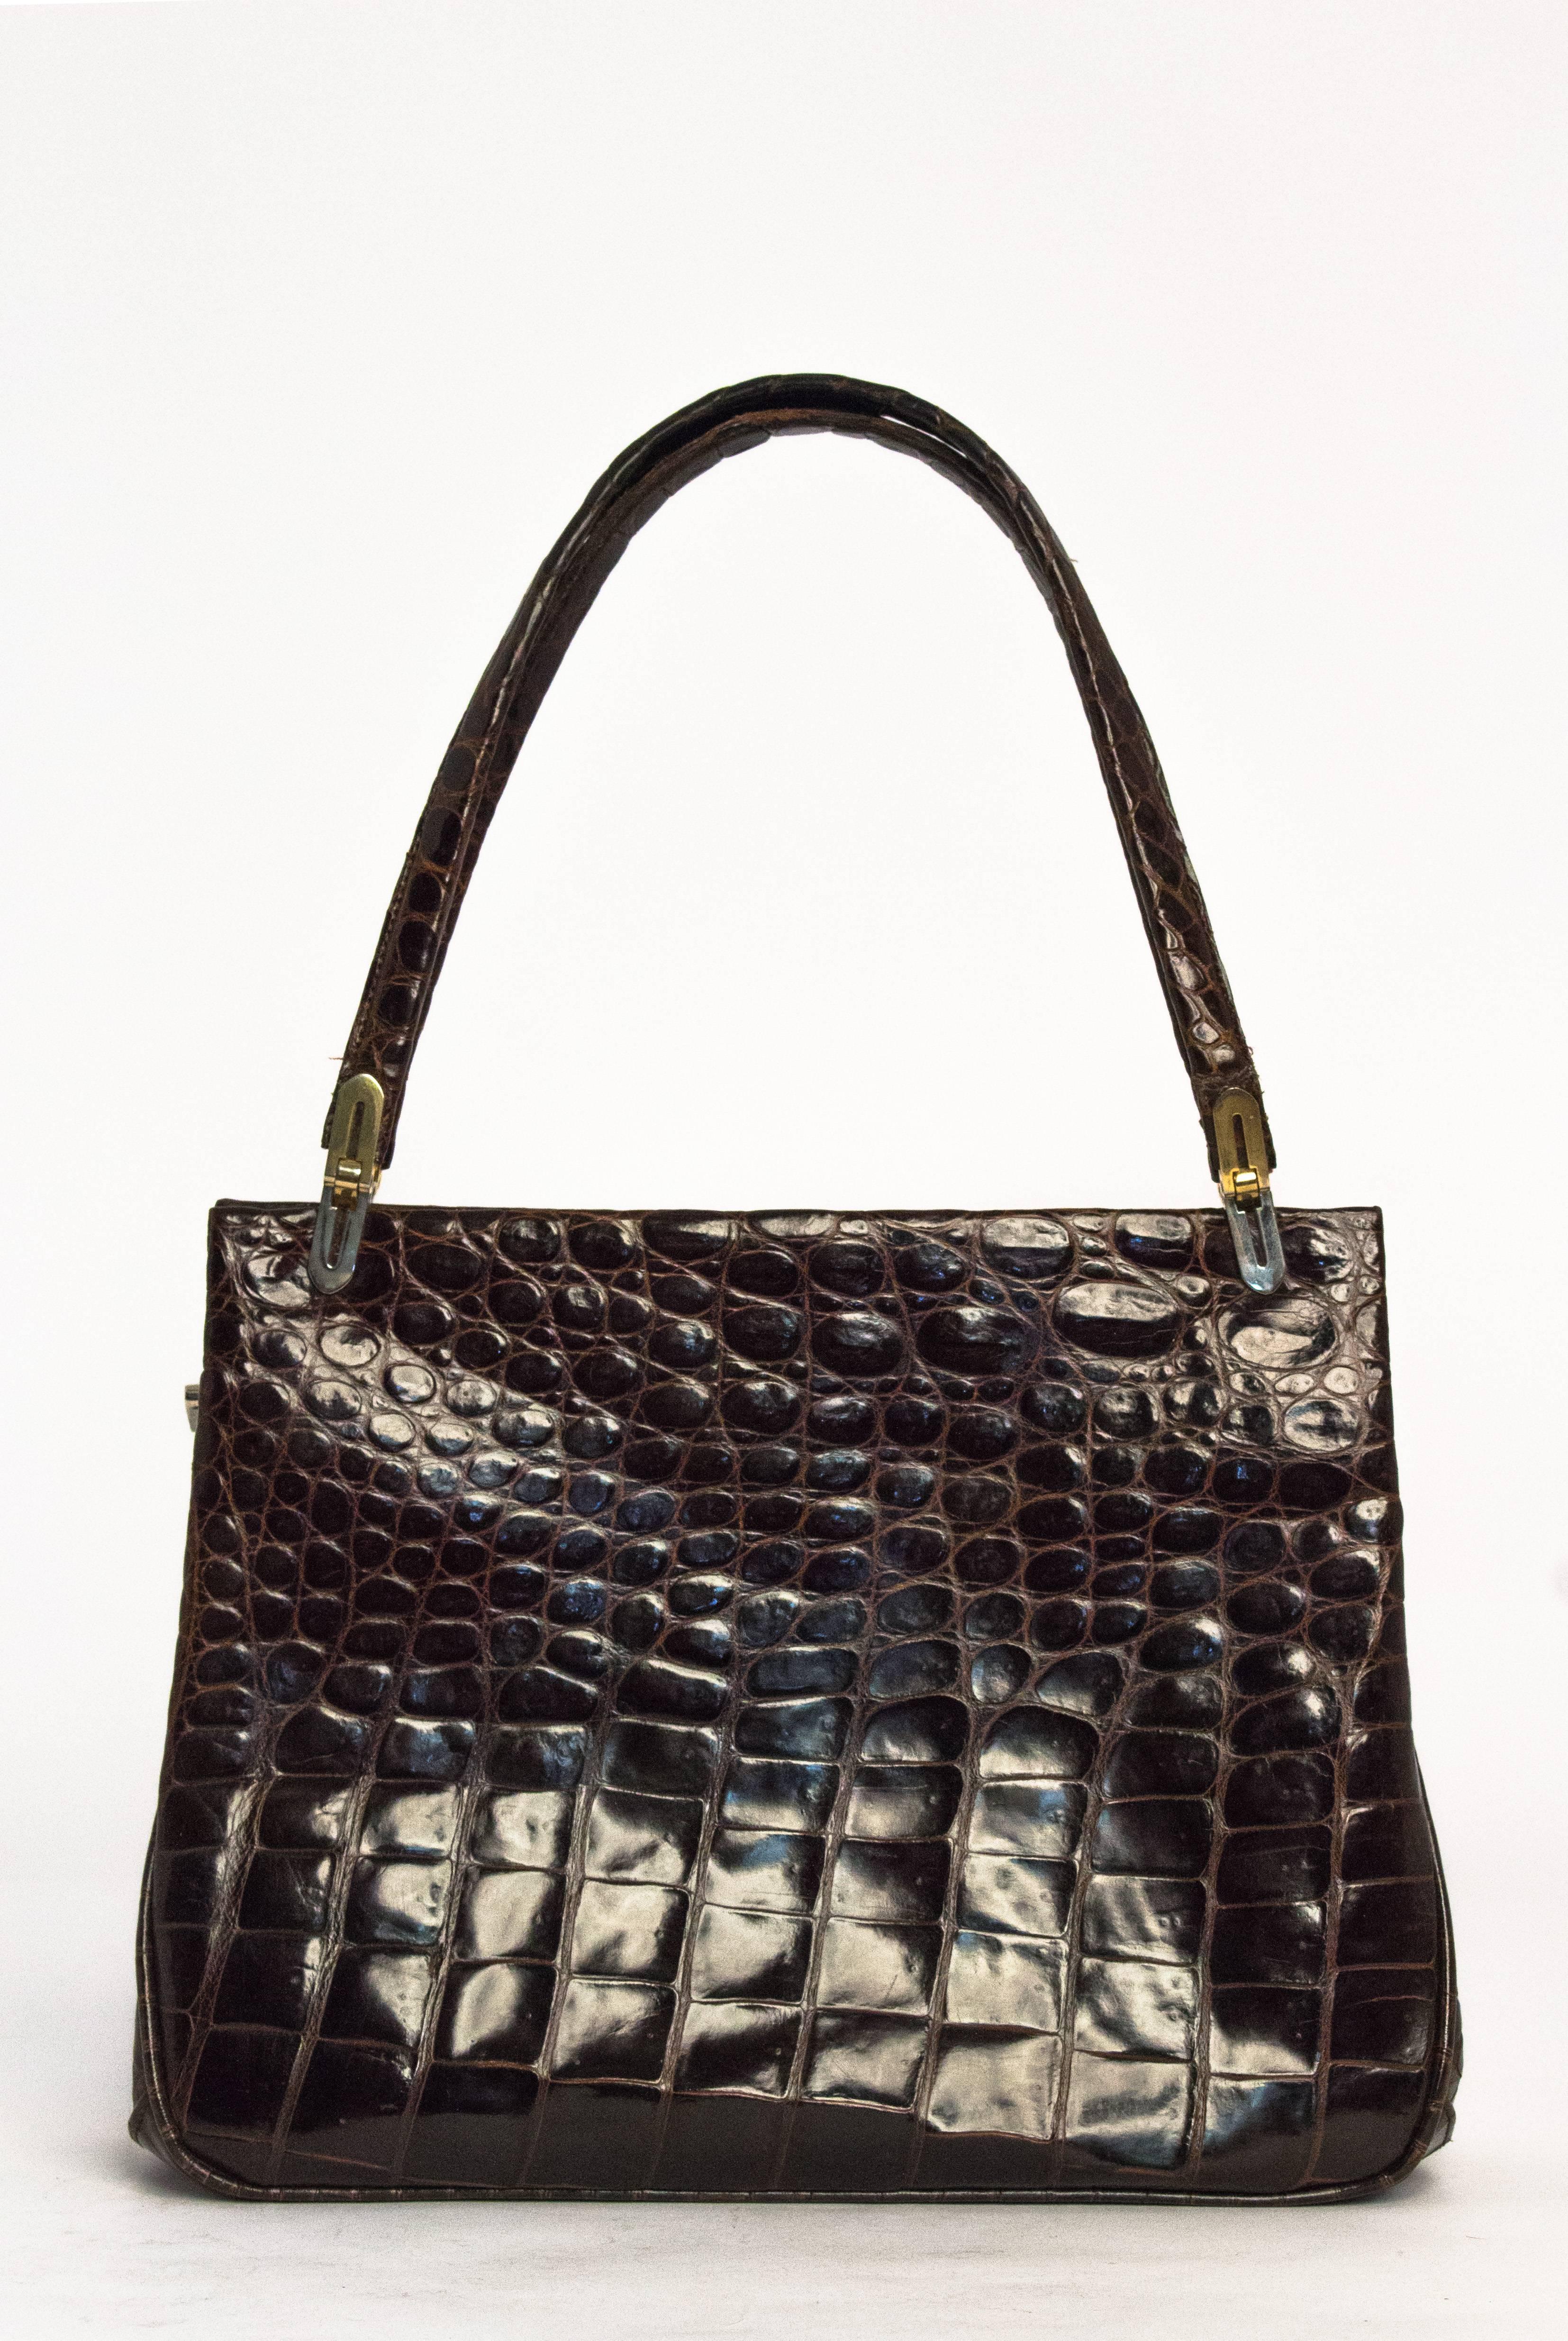 1960s chocolate brown alligator purse. Gold toned hardware. Leather lining. Two side pockets.

Strap length: 17"
Purse height: 8 1/4"
Purse length: 10 1/2" 
Purse width: 3" base